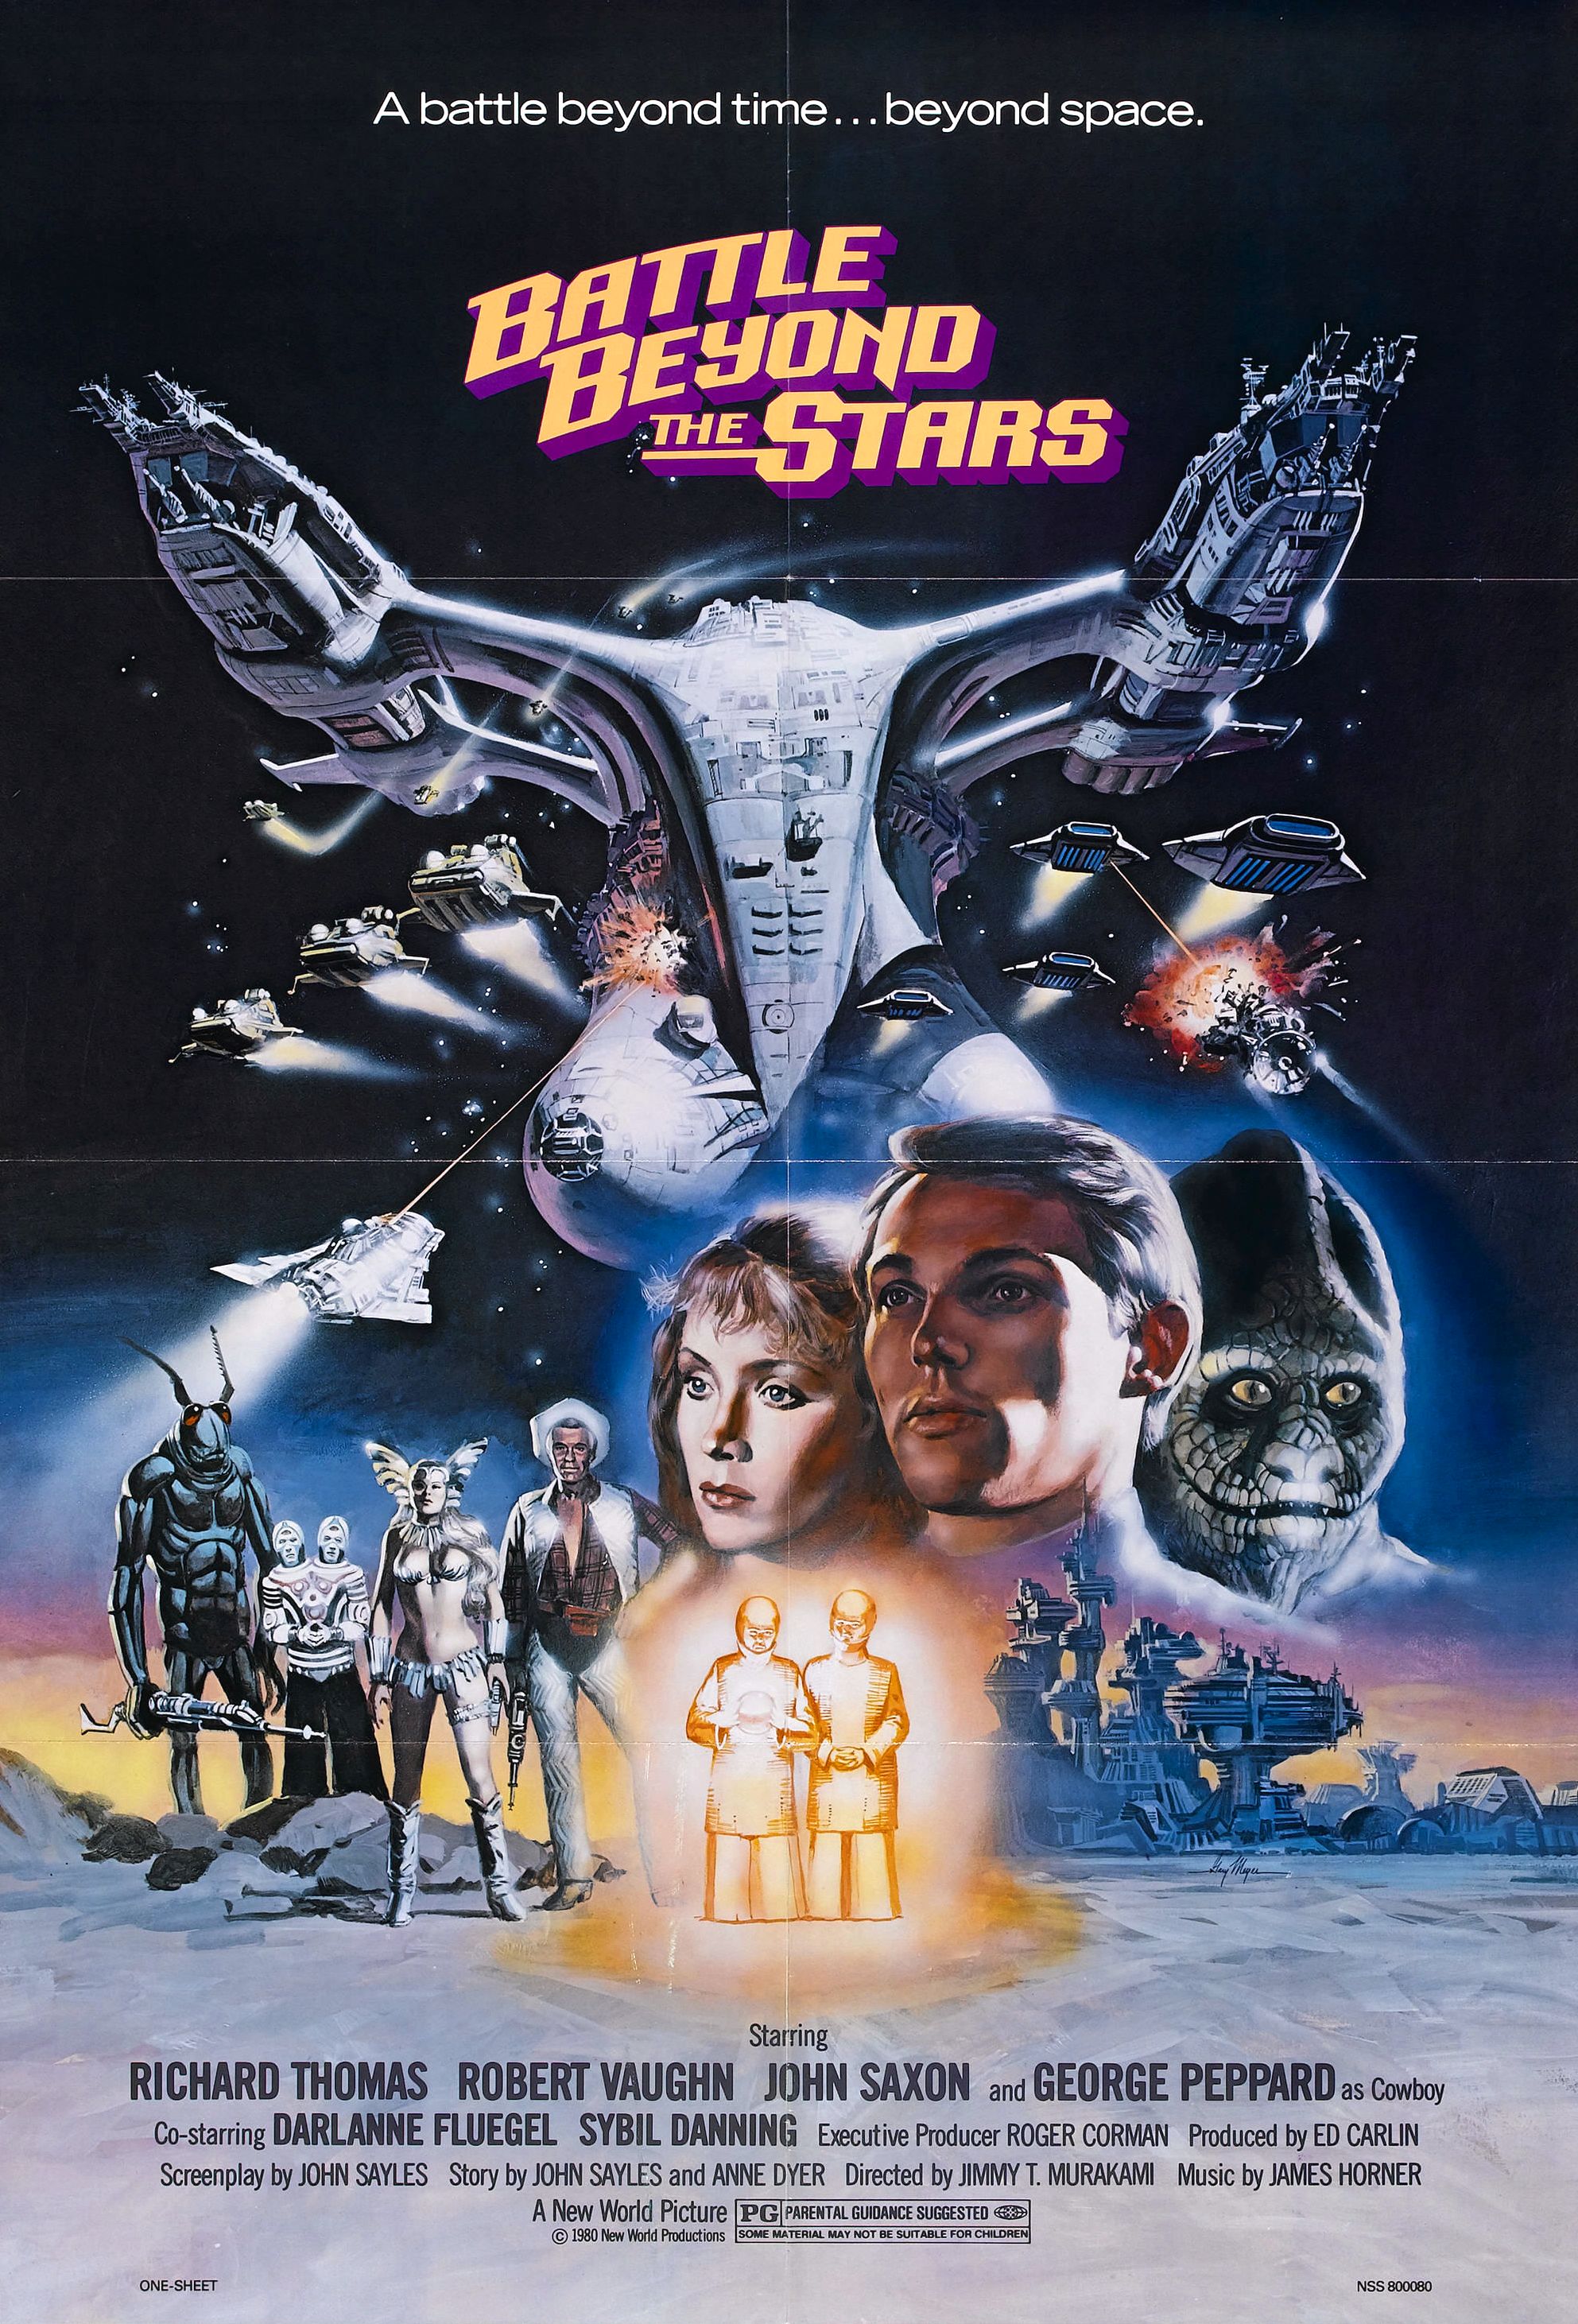 battle beyond stars poster 01 - Retro Gallery Archive (Full Size)